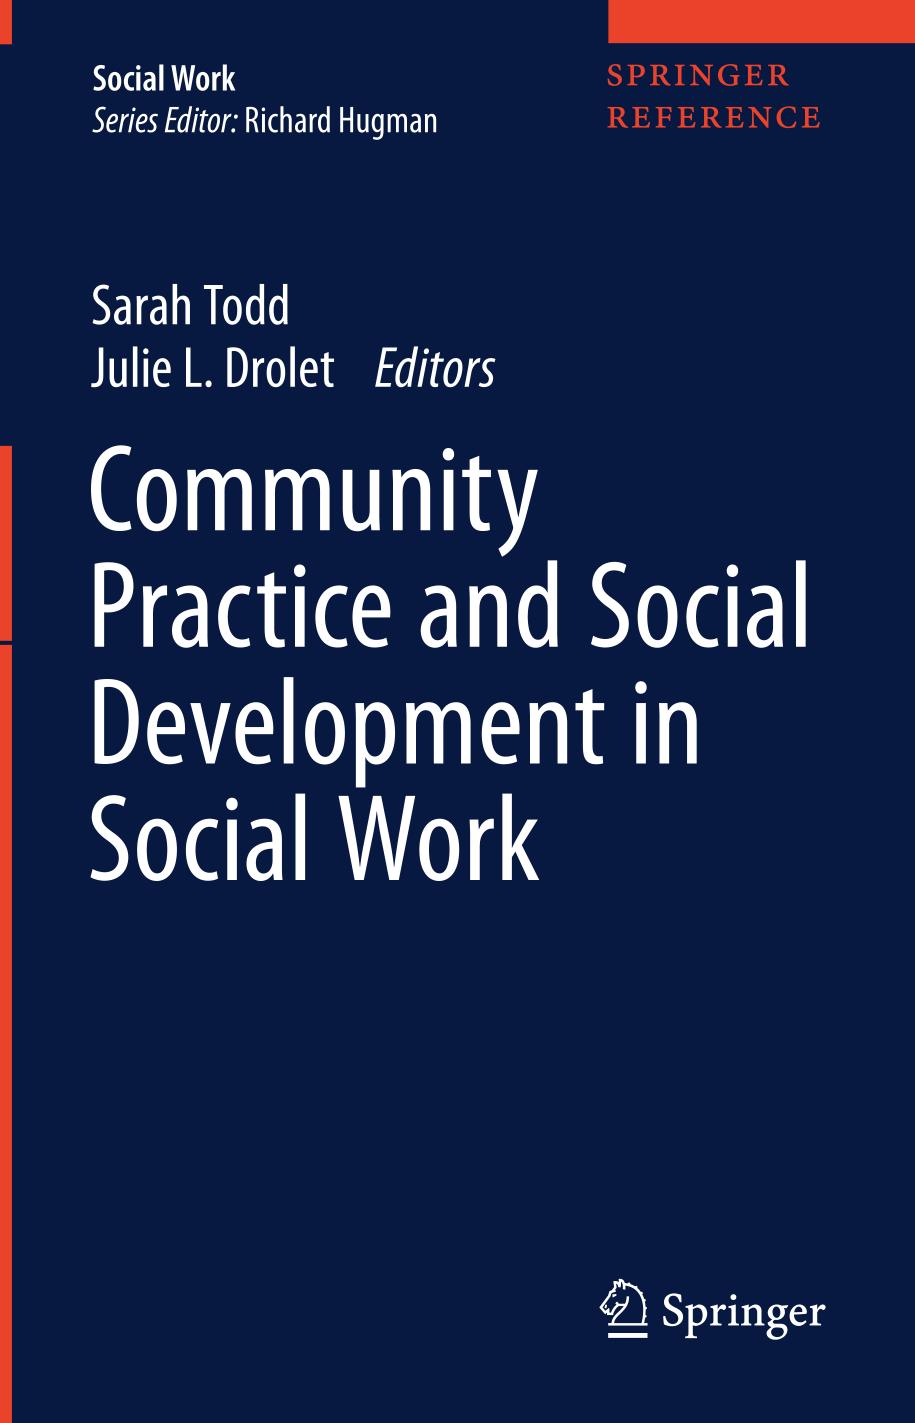 Community Practice and Social Development in Social Work